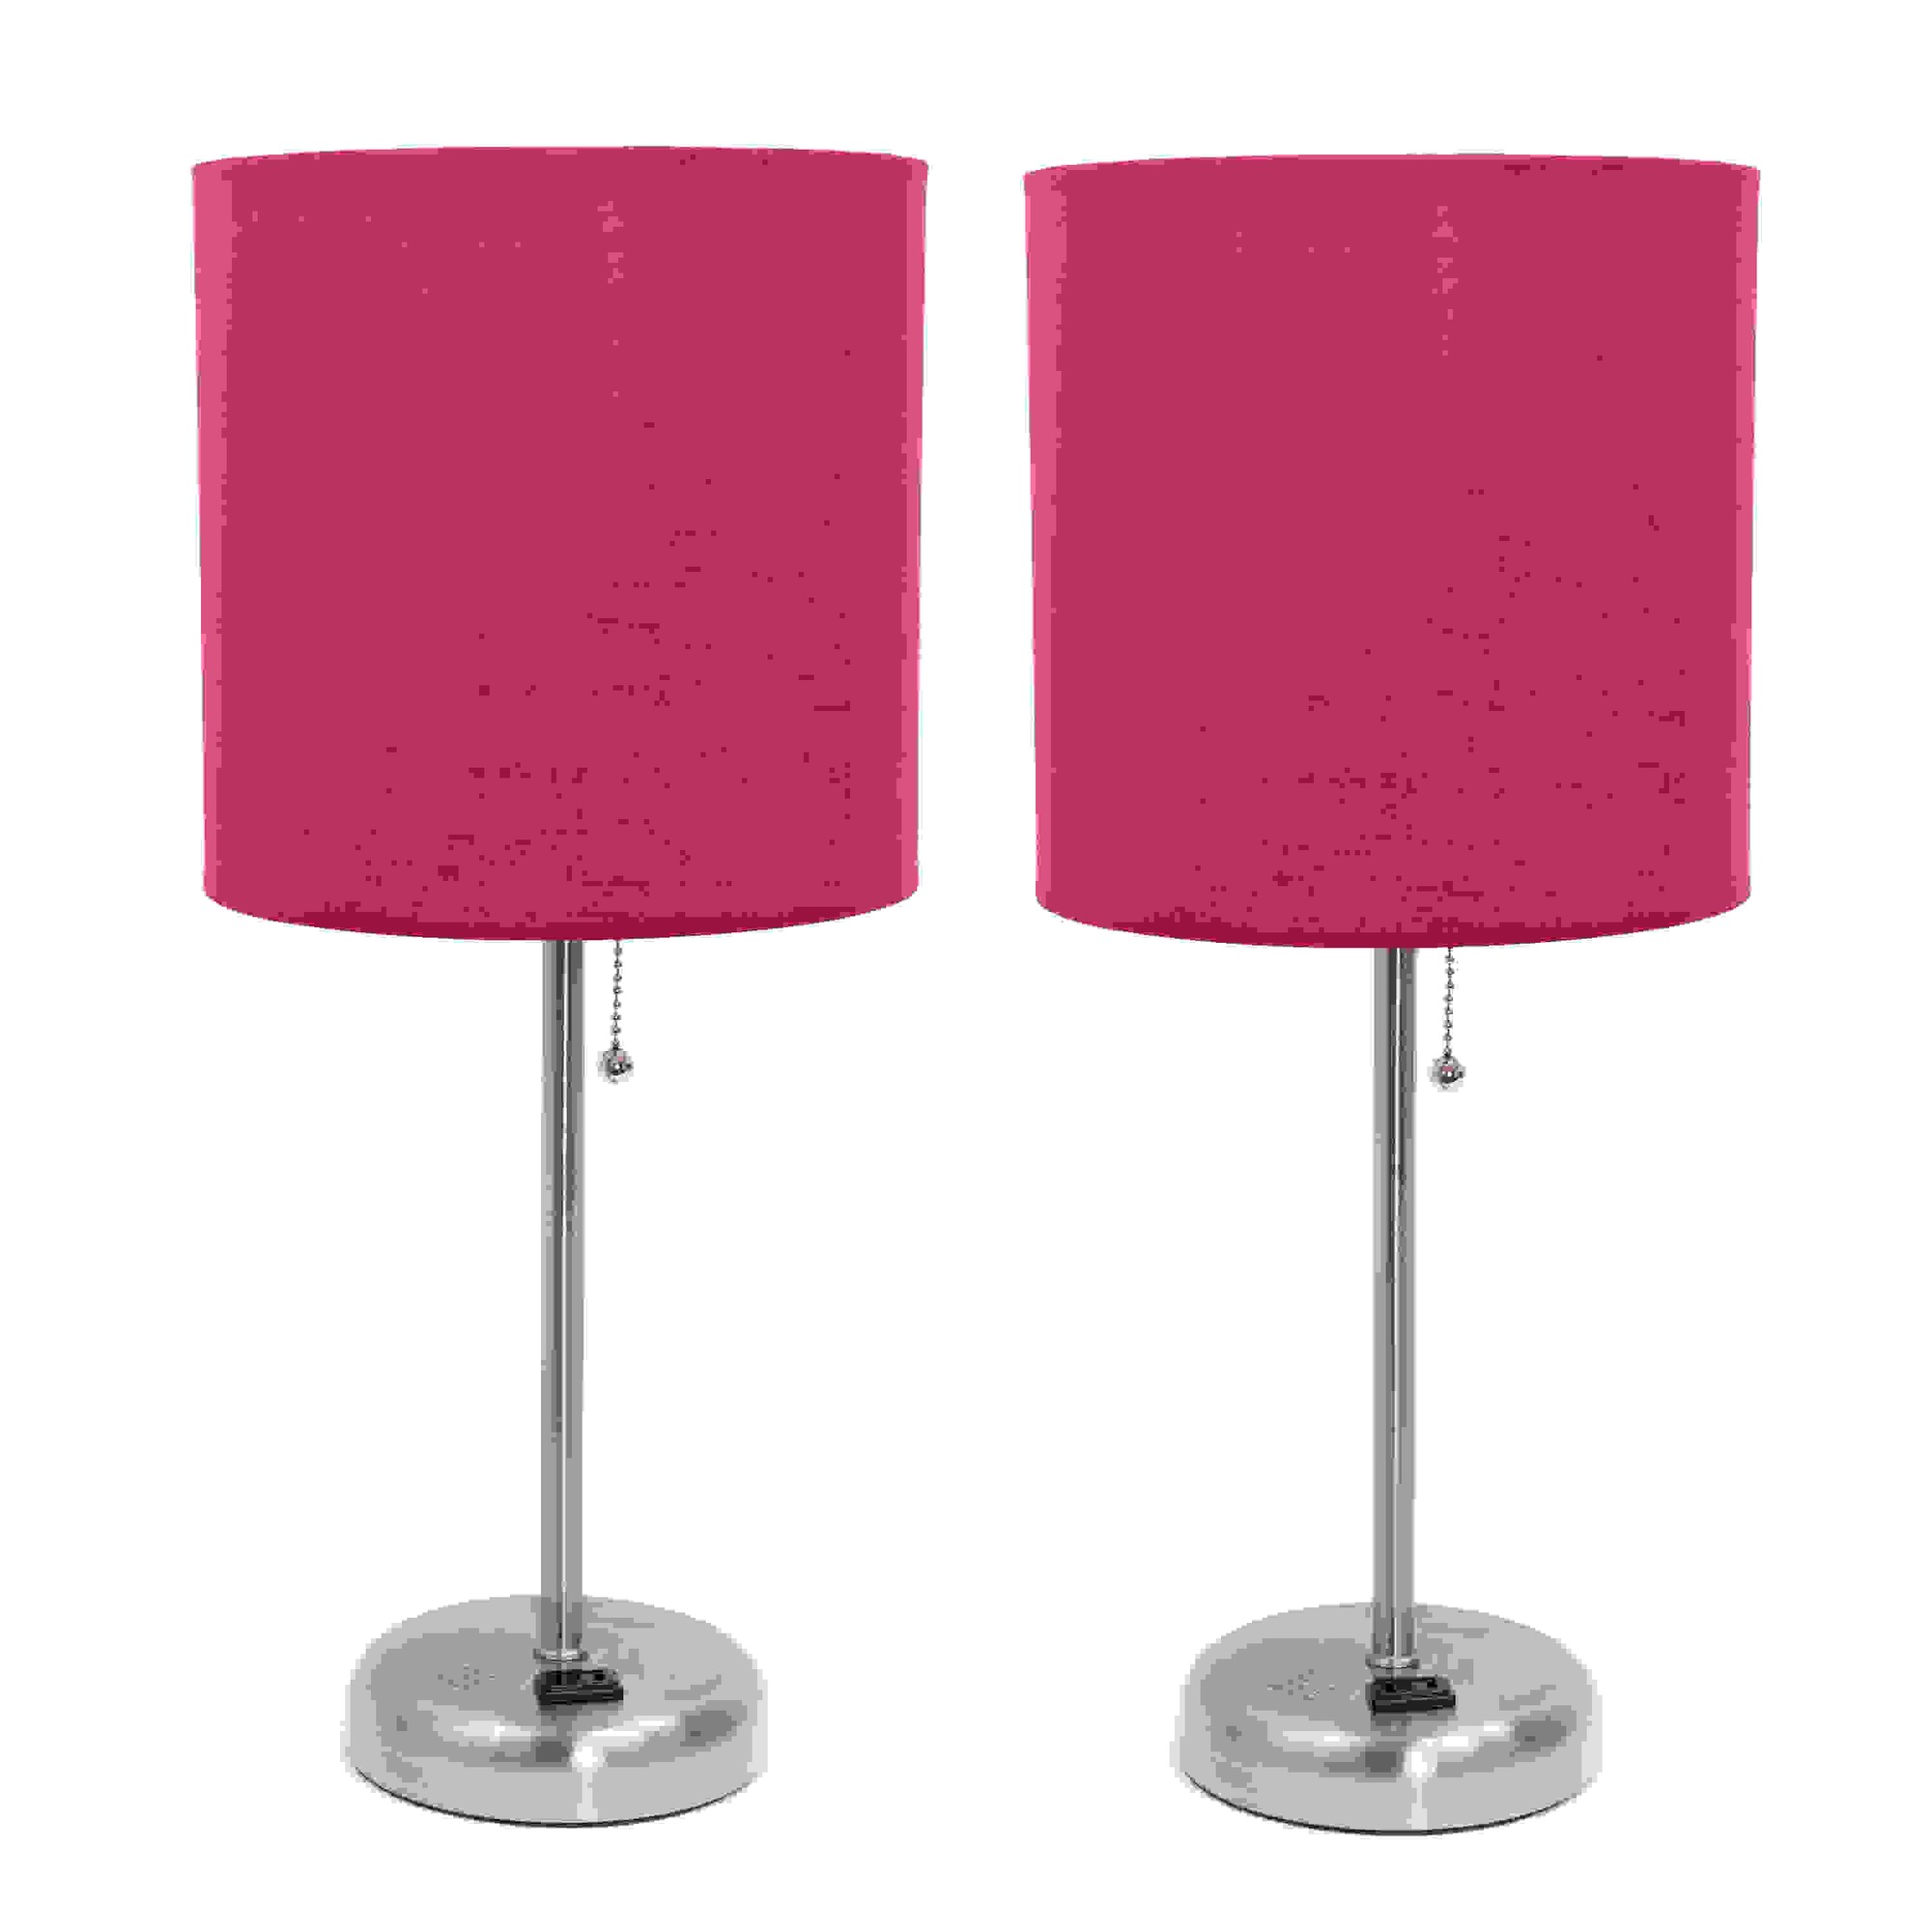 Simple Designs Brushed Steel Stick Lamp with Charging Outlet and Fabric Shade 2 Pack Set, Pink